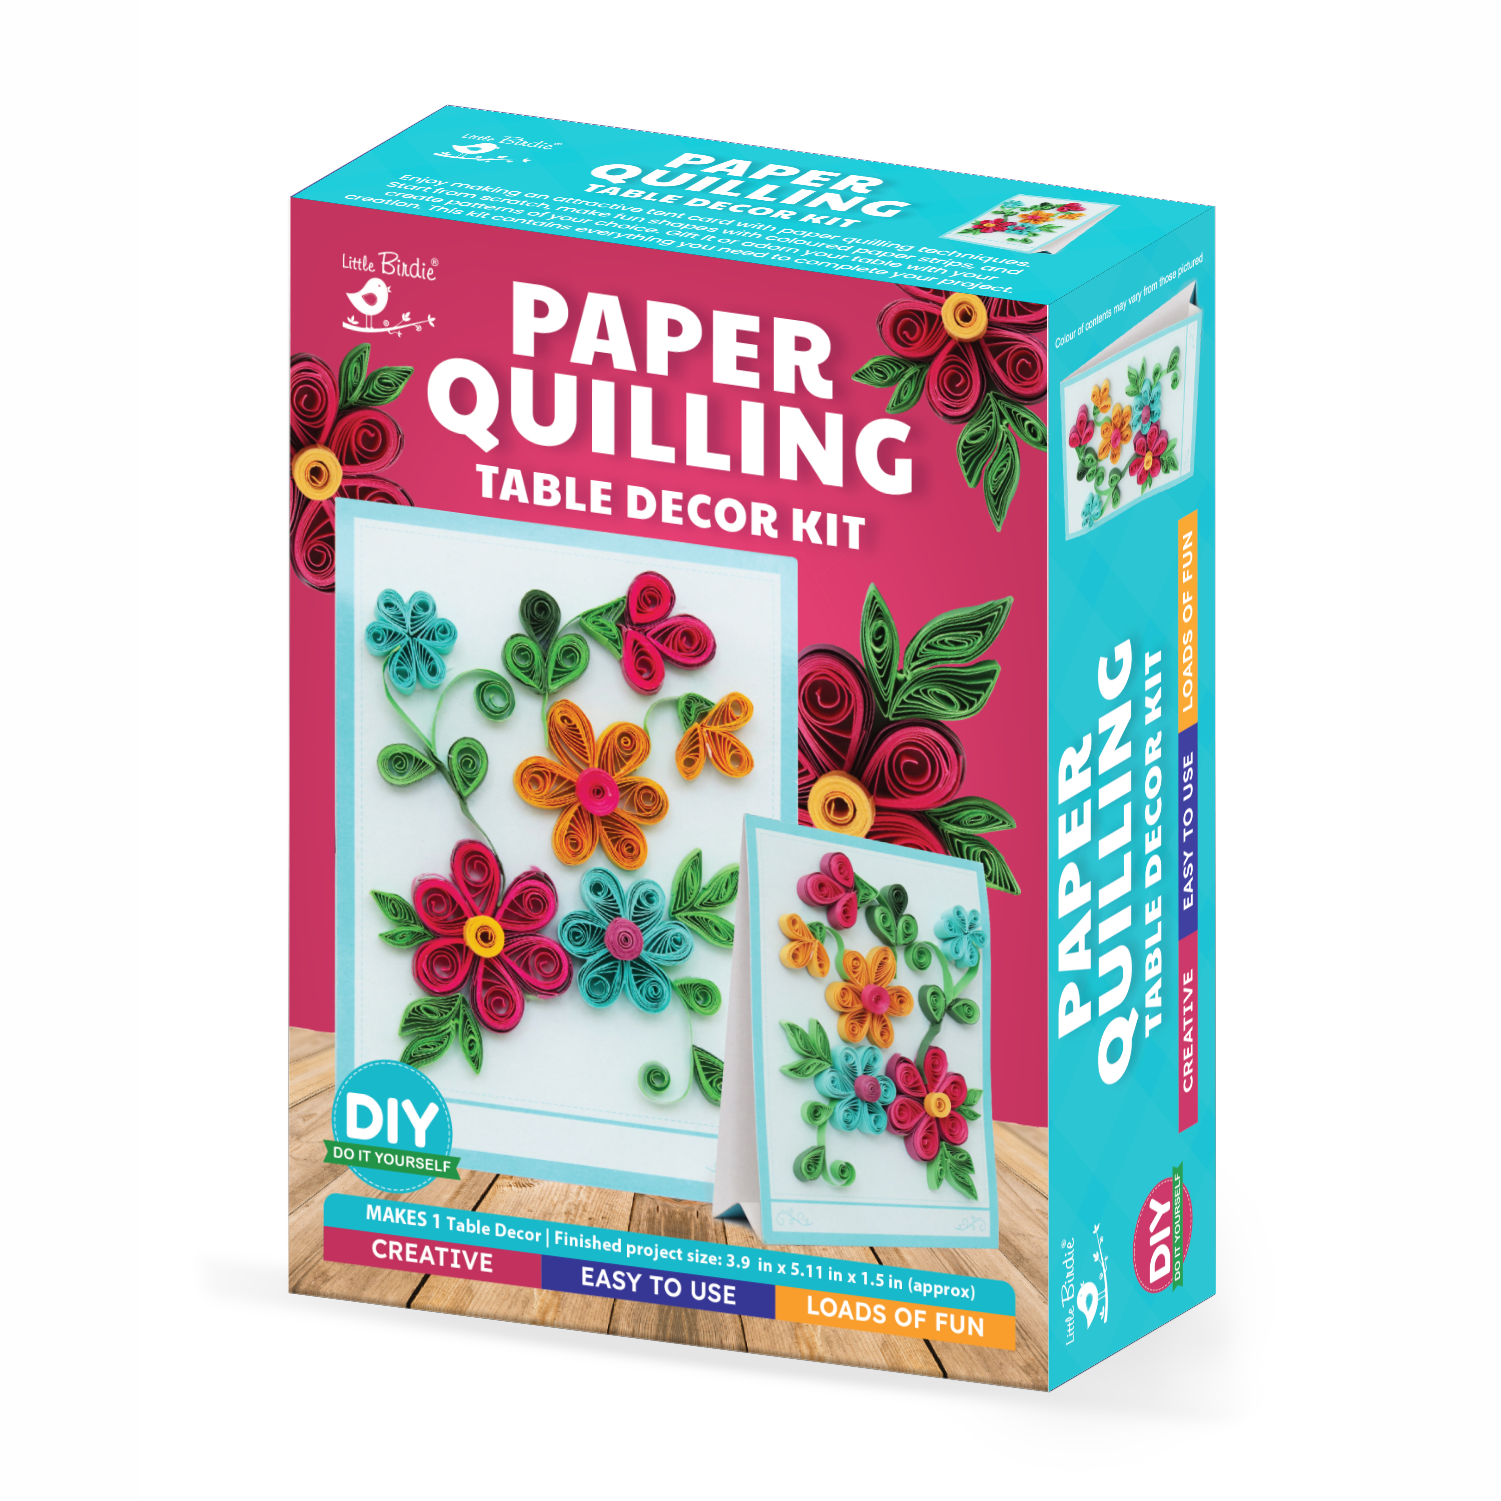 DIY Paper Quilling Table Decor Kit